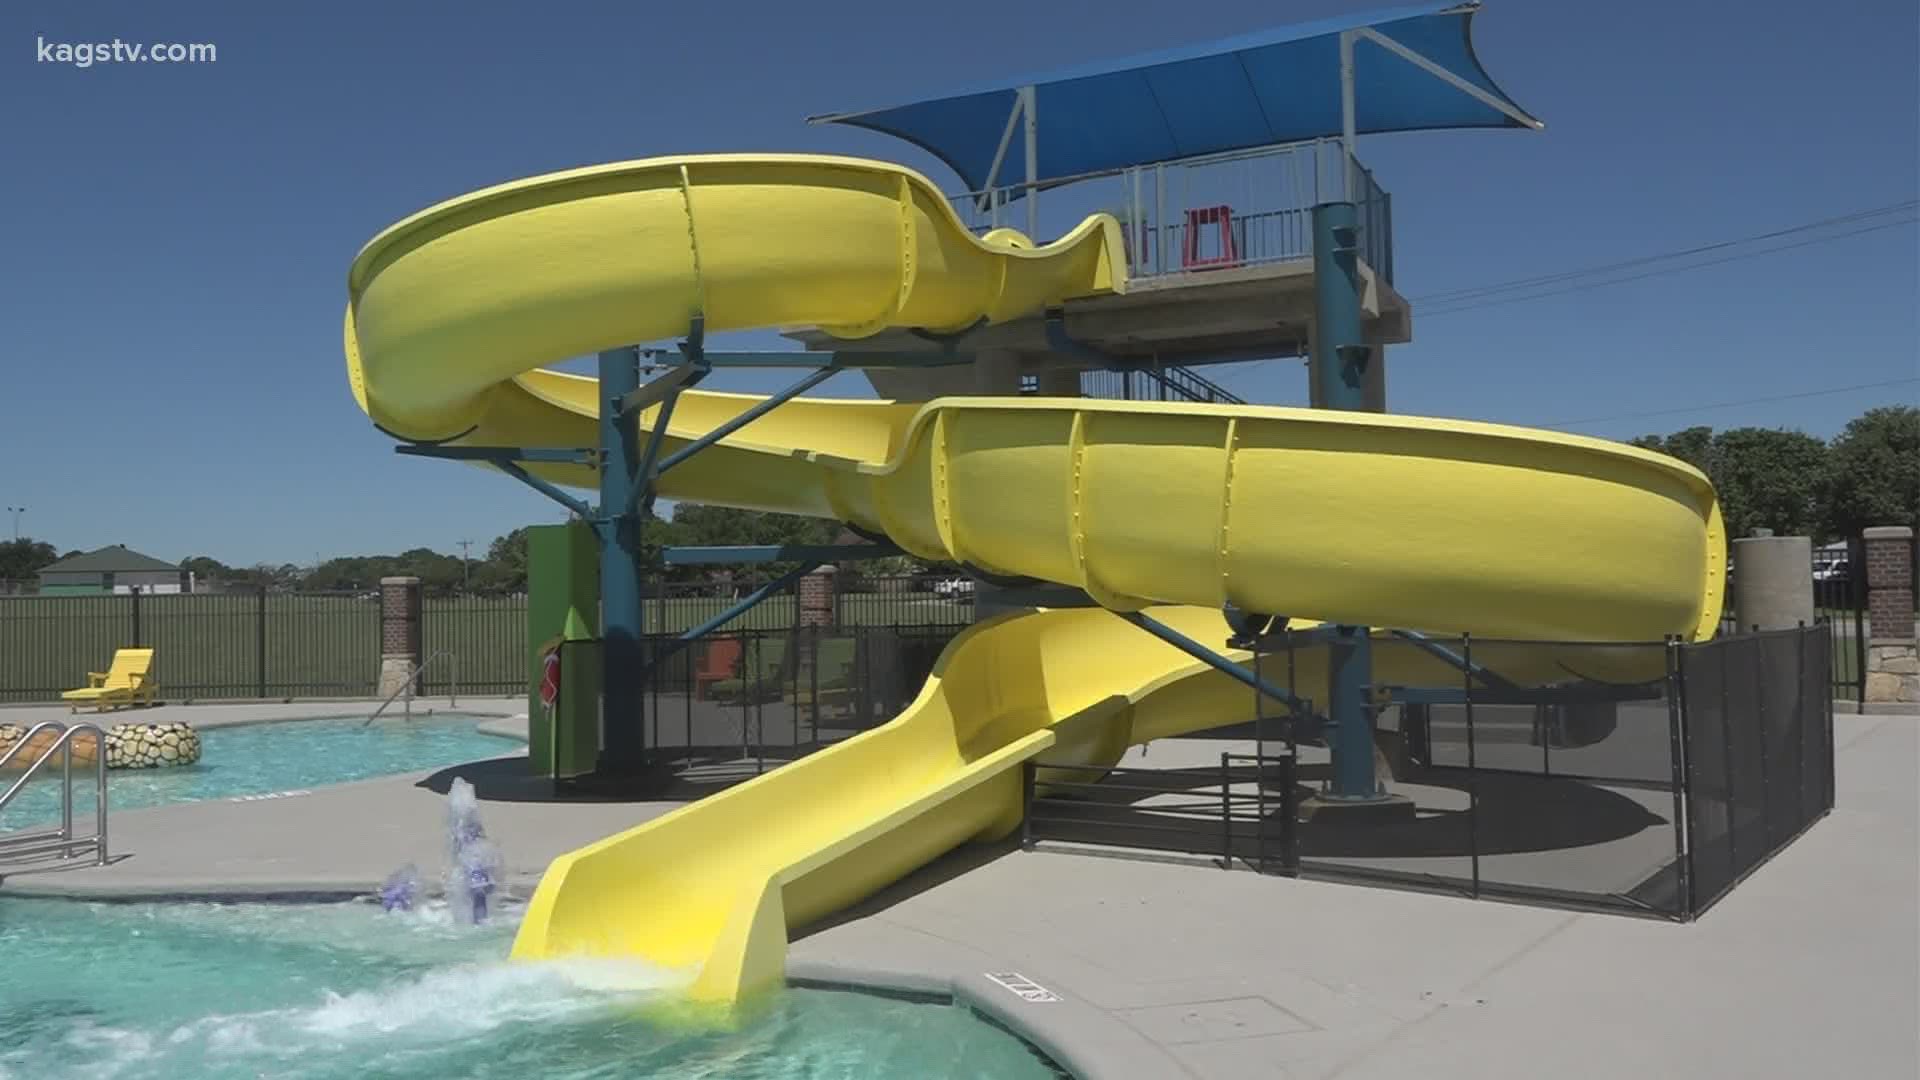 The Brenham aquatic center is open to the public, but with new protocols in place.